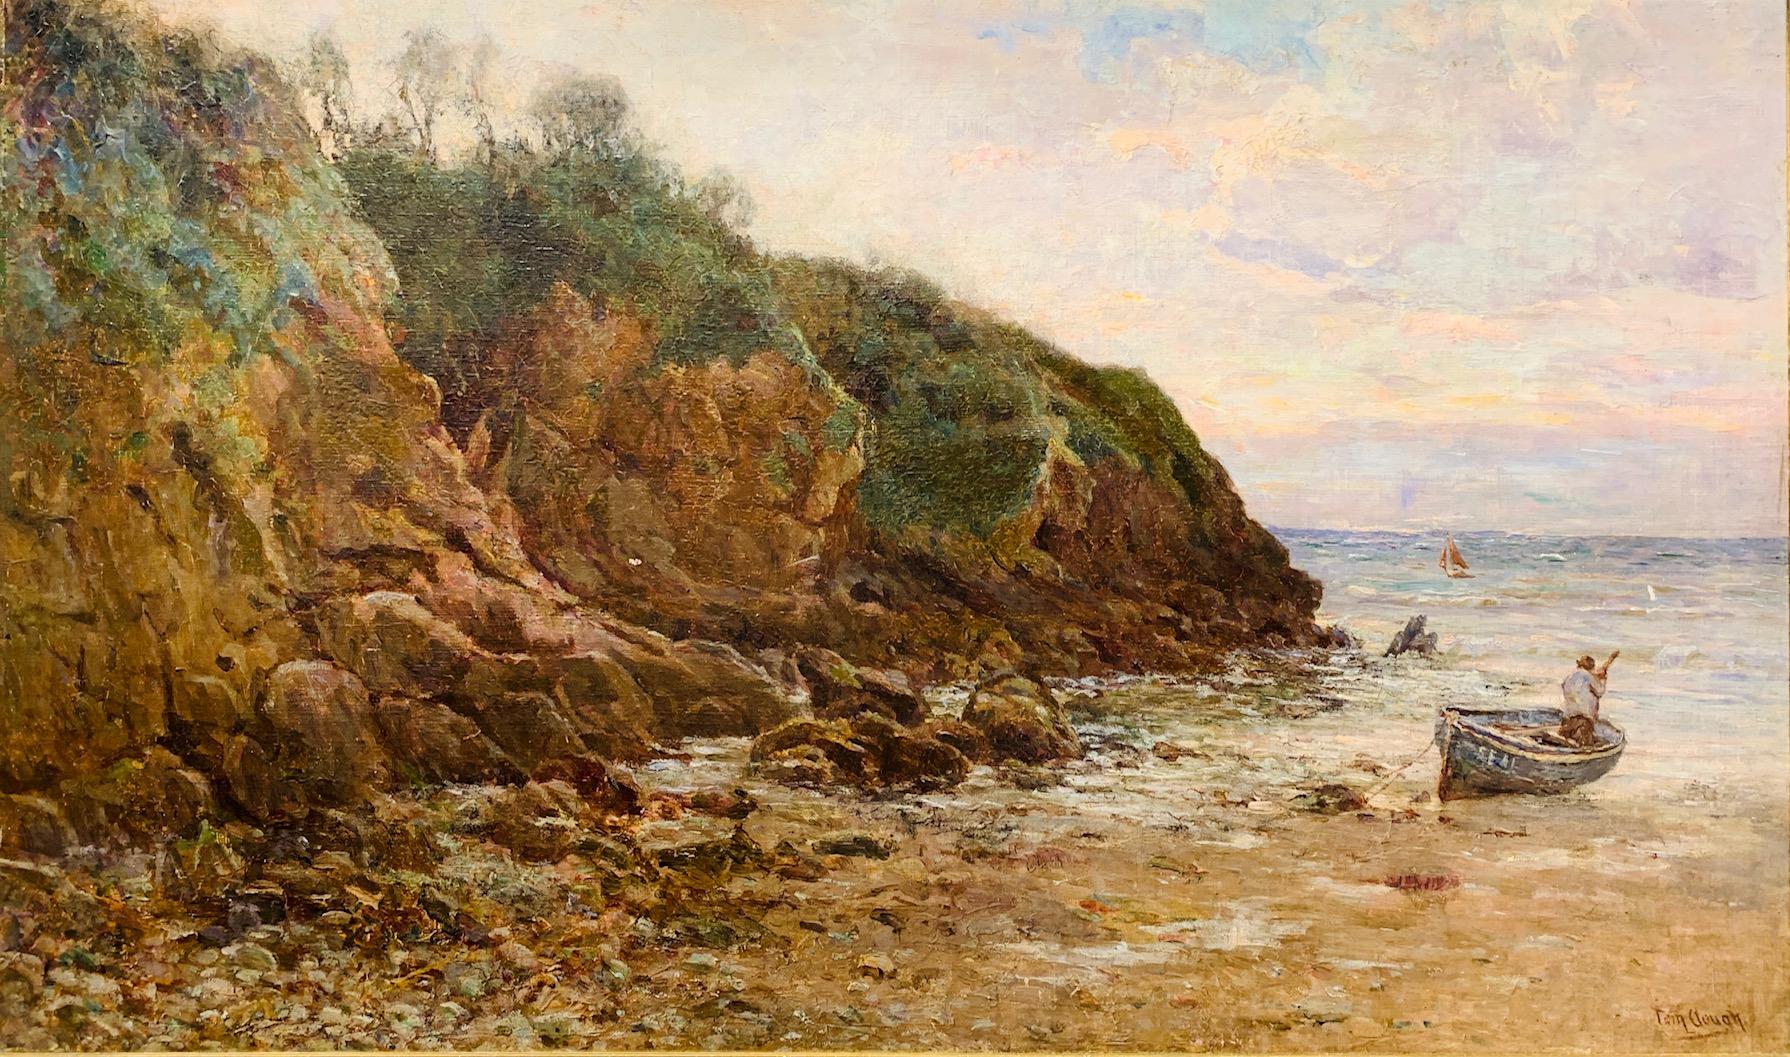 The Cliffs, British Impressionism - Painting by Thomas Clough